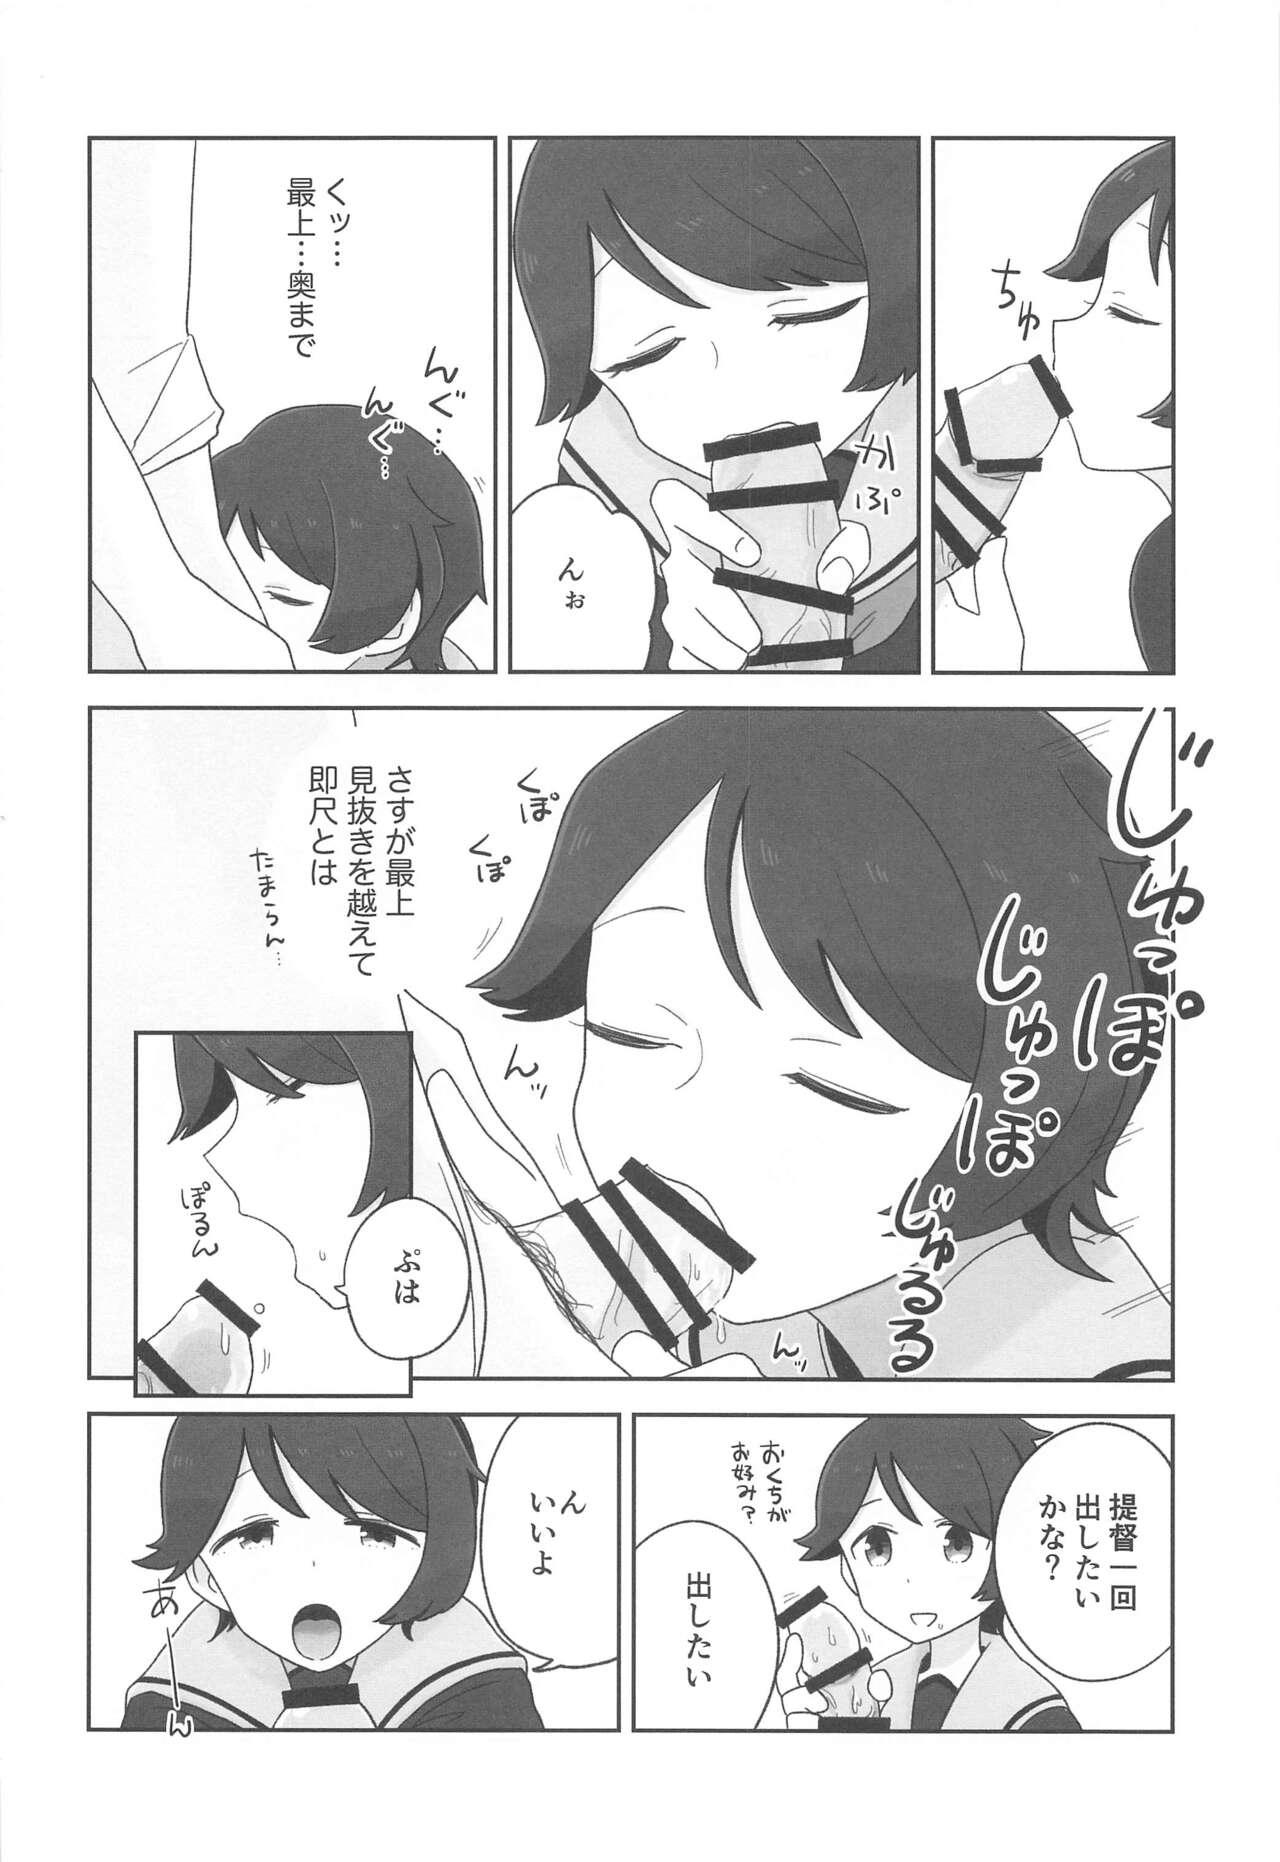 Hairy Pussy Mogamix - Make love with Mogami. - Kantai collection Stunning - Page 3